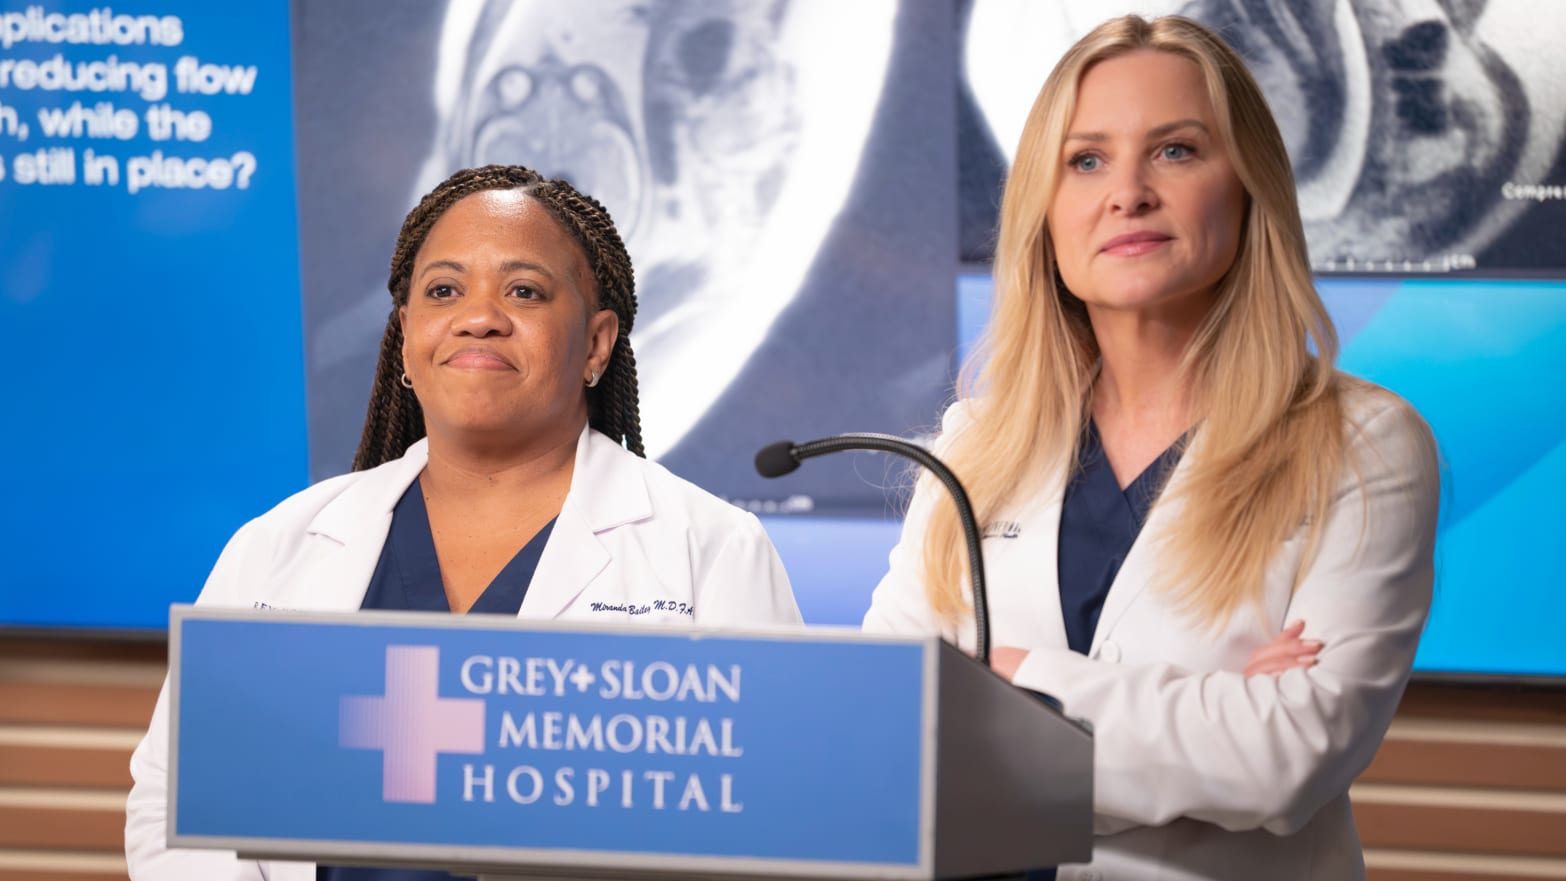 Dr. Miranda Bailey (Chandra Wilson), left, and Dr. Arizona Robbins (Jessica Capshaw), right, brief their colleagues on an upcoming procedure